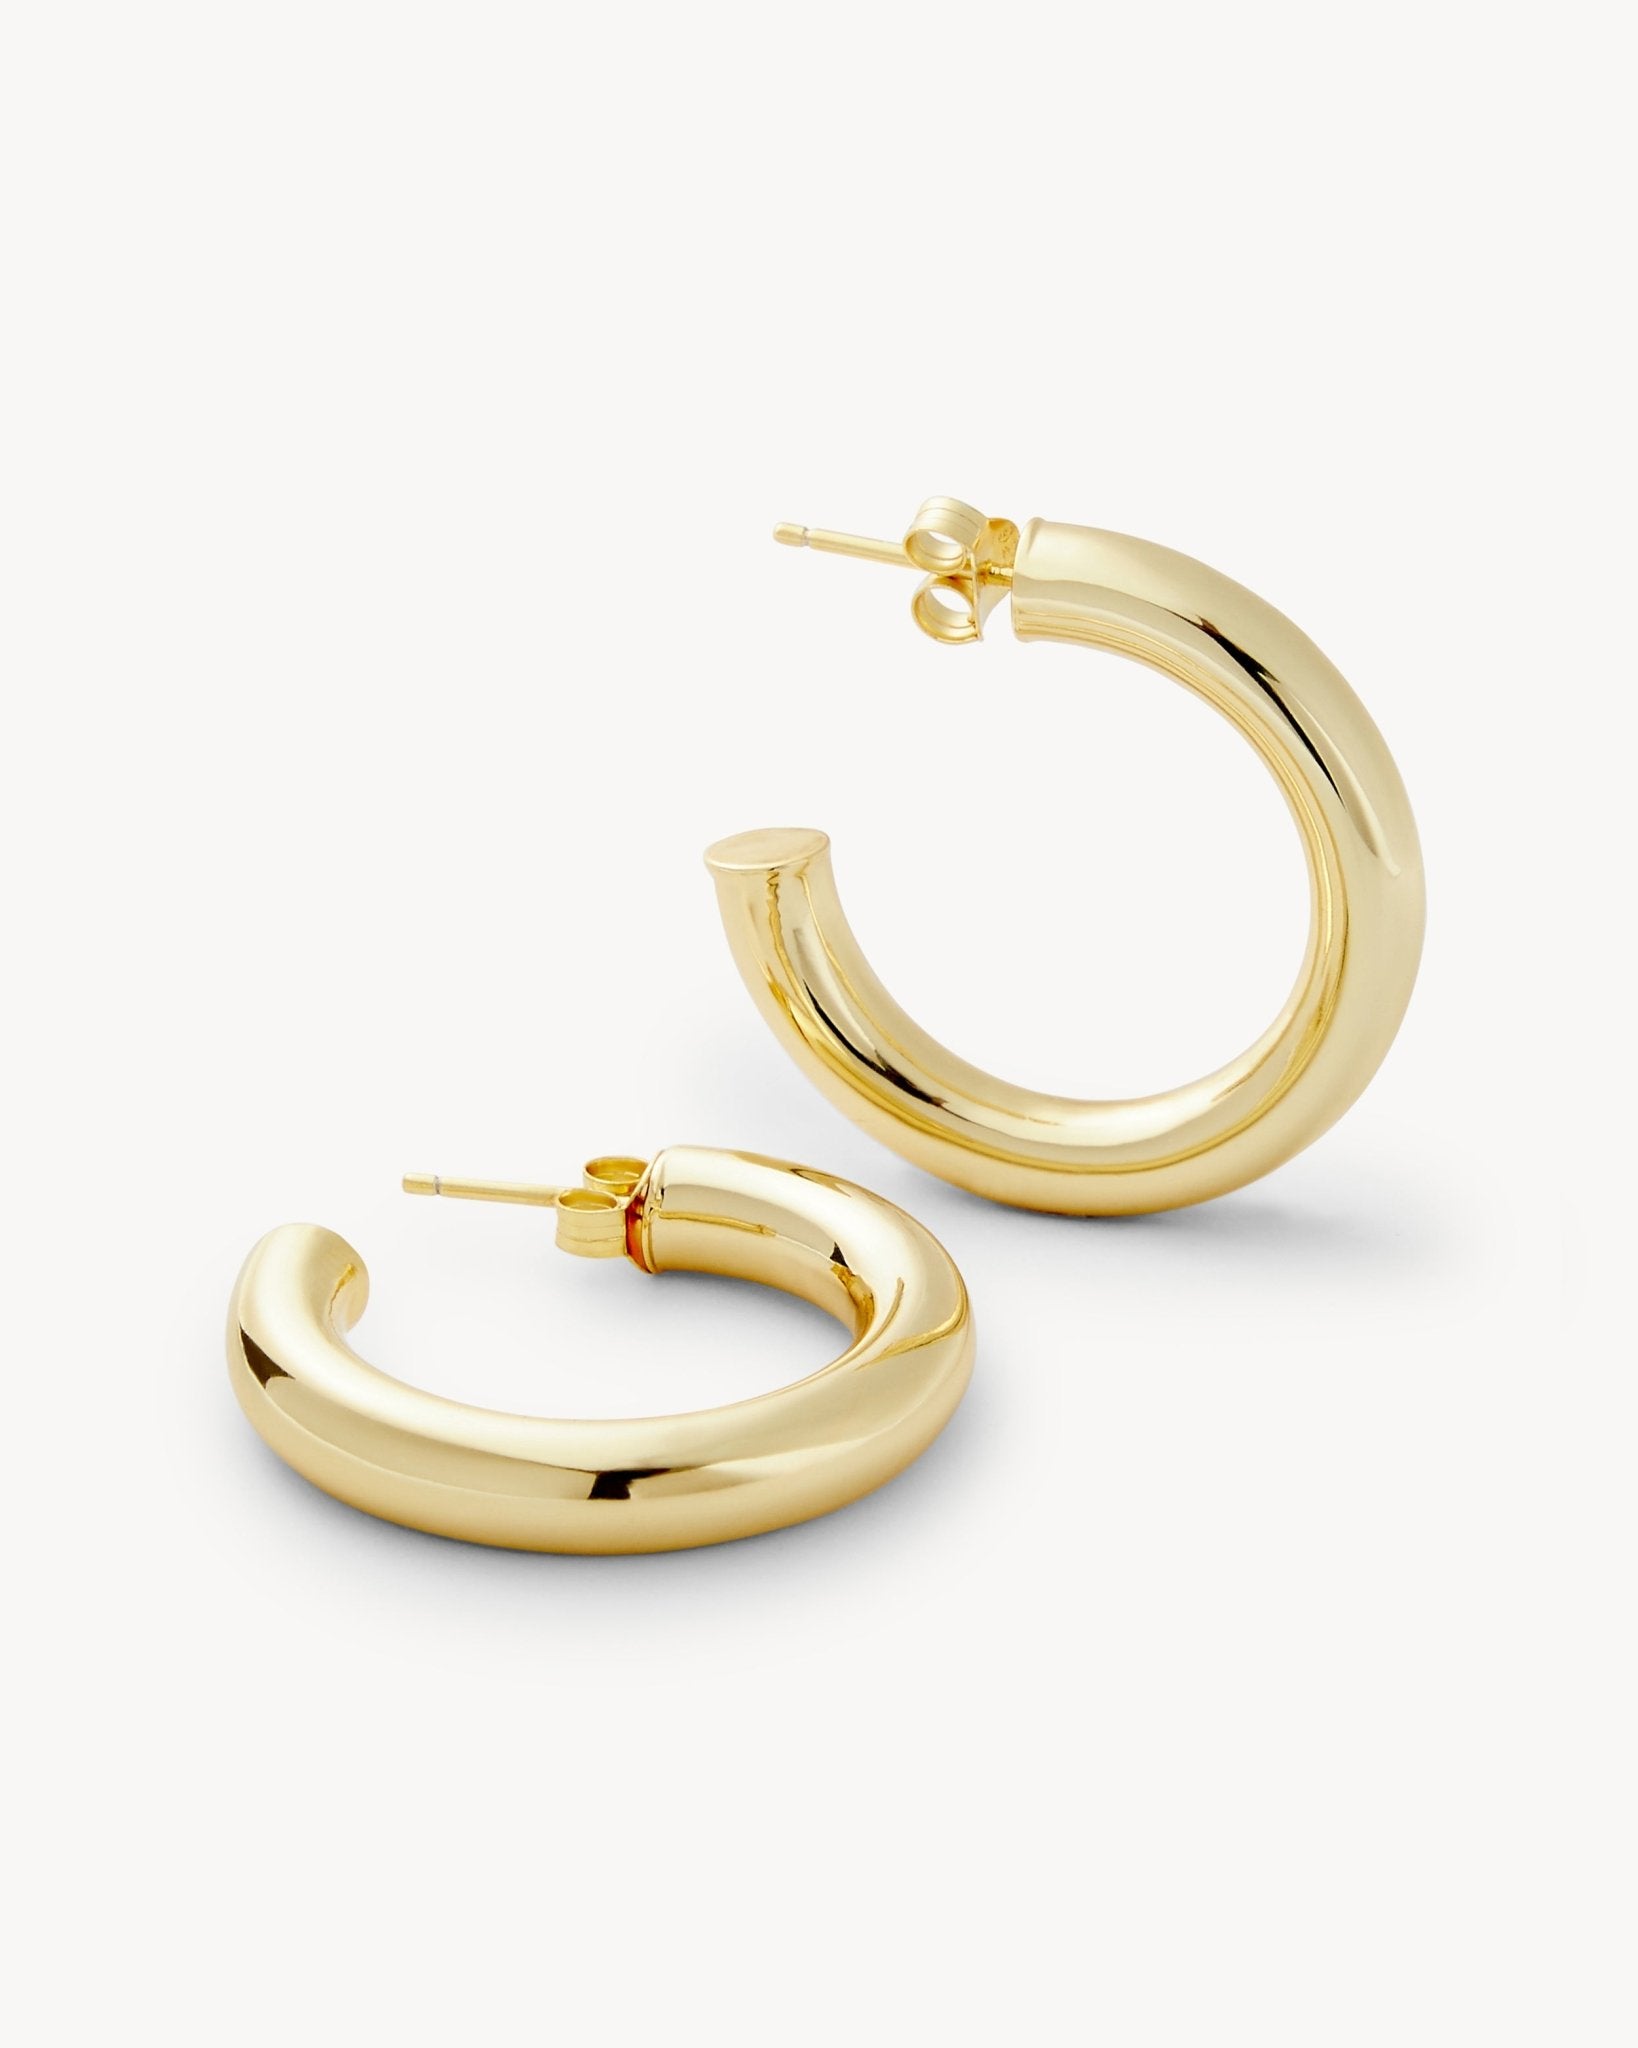 1" Perfect Hoops in Gold - MACHETE